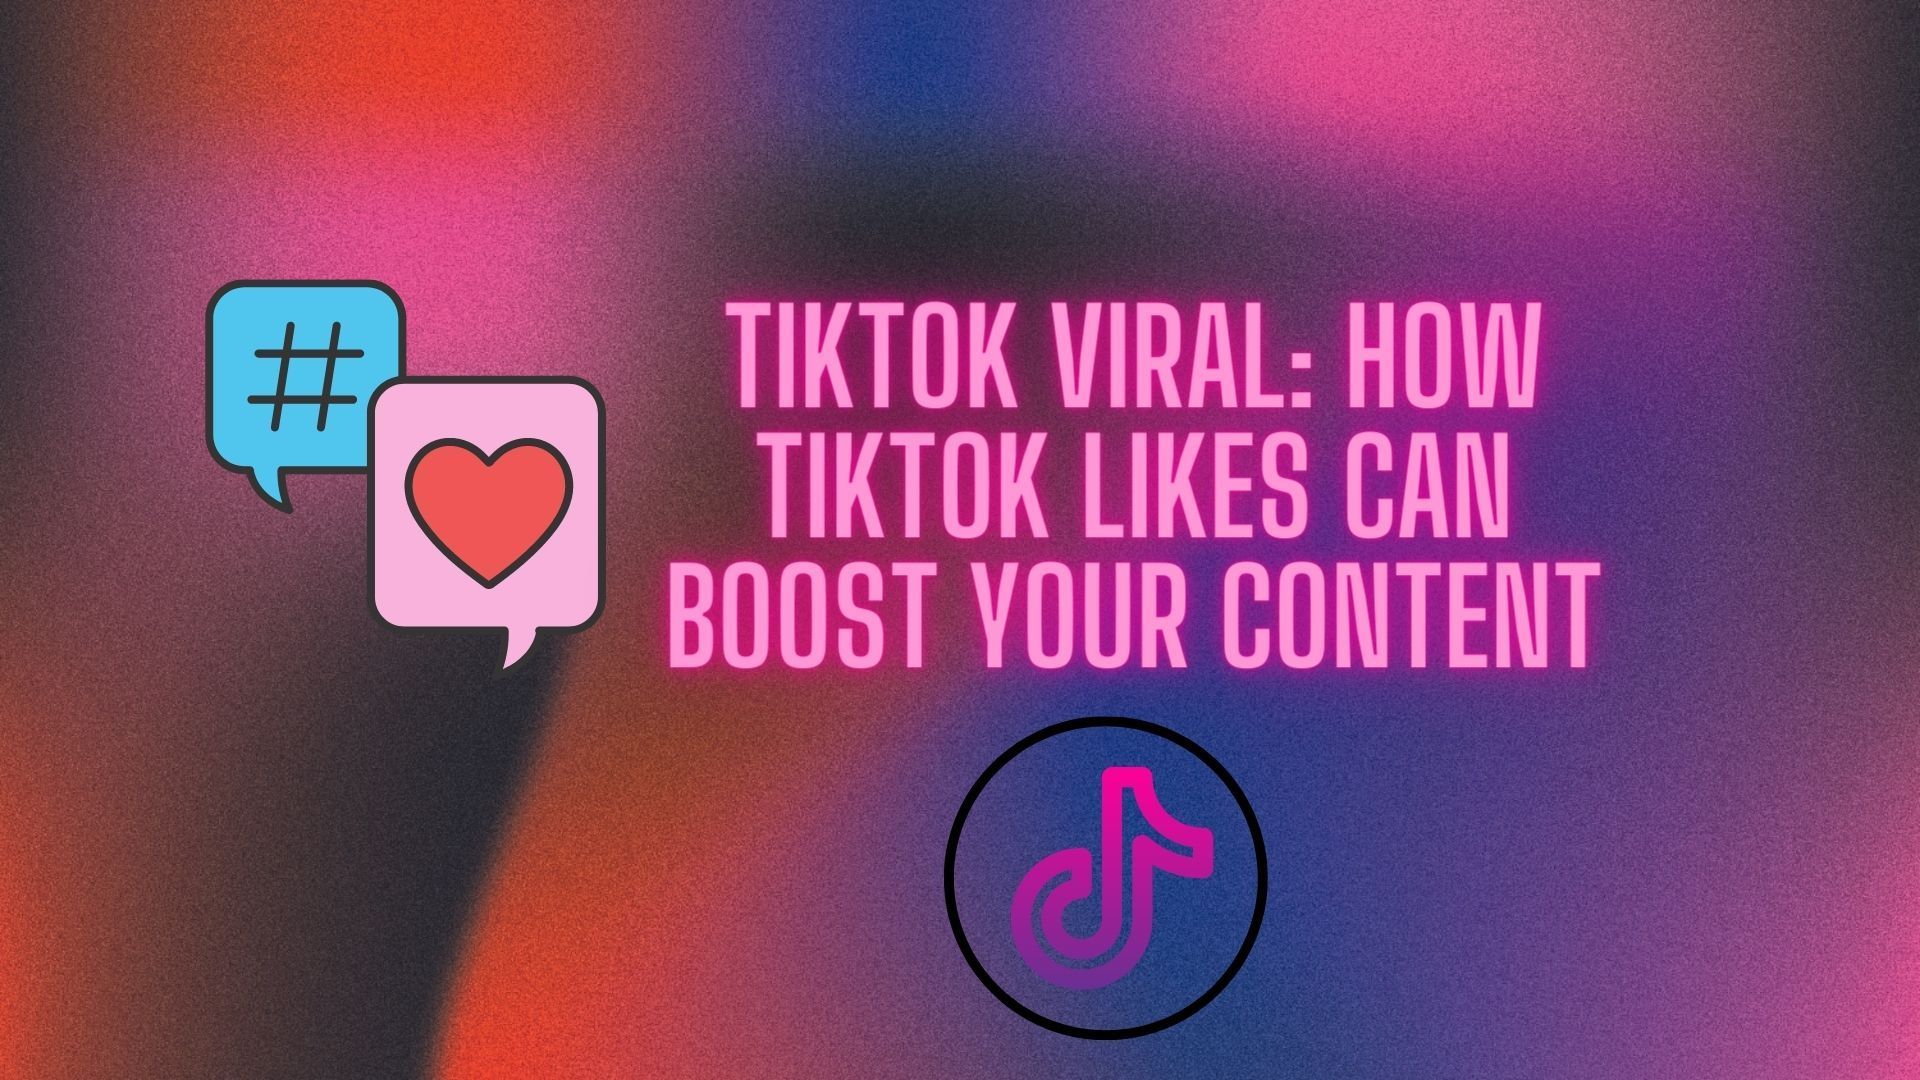 TikTok viral: How TikTok likes can boost your content